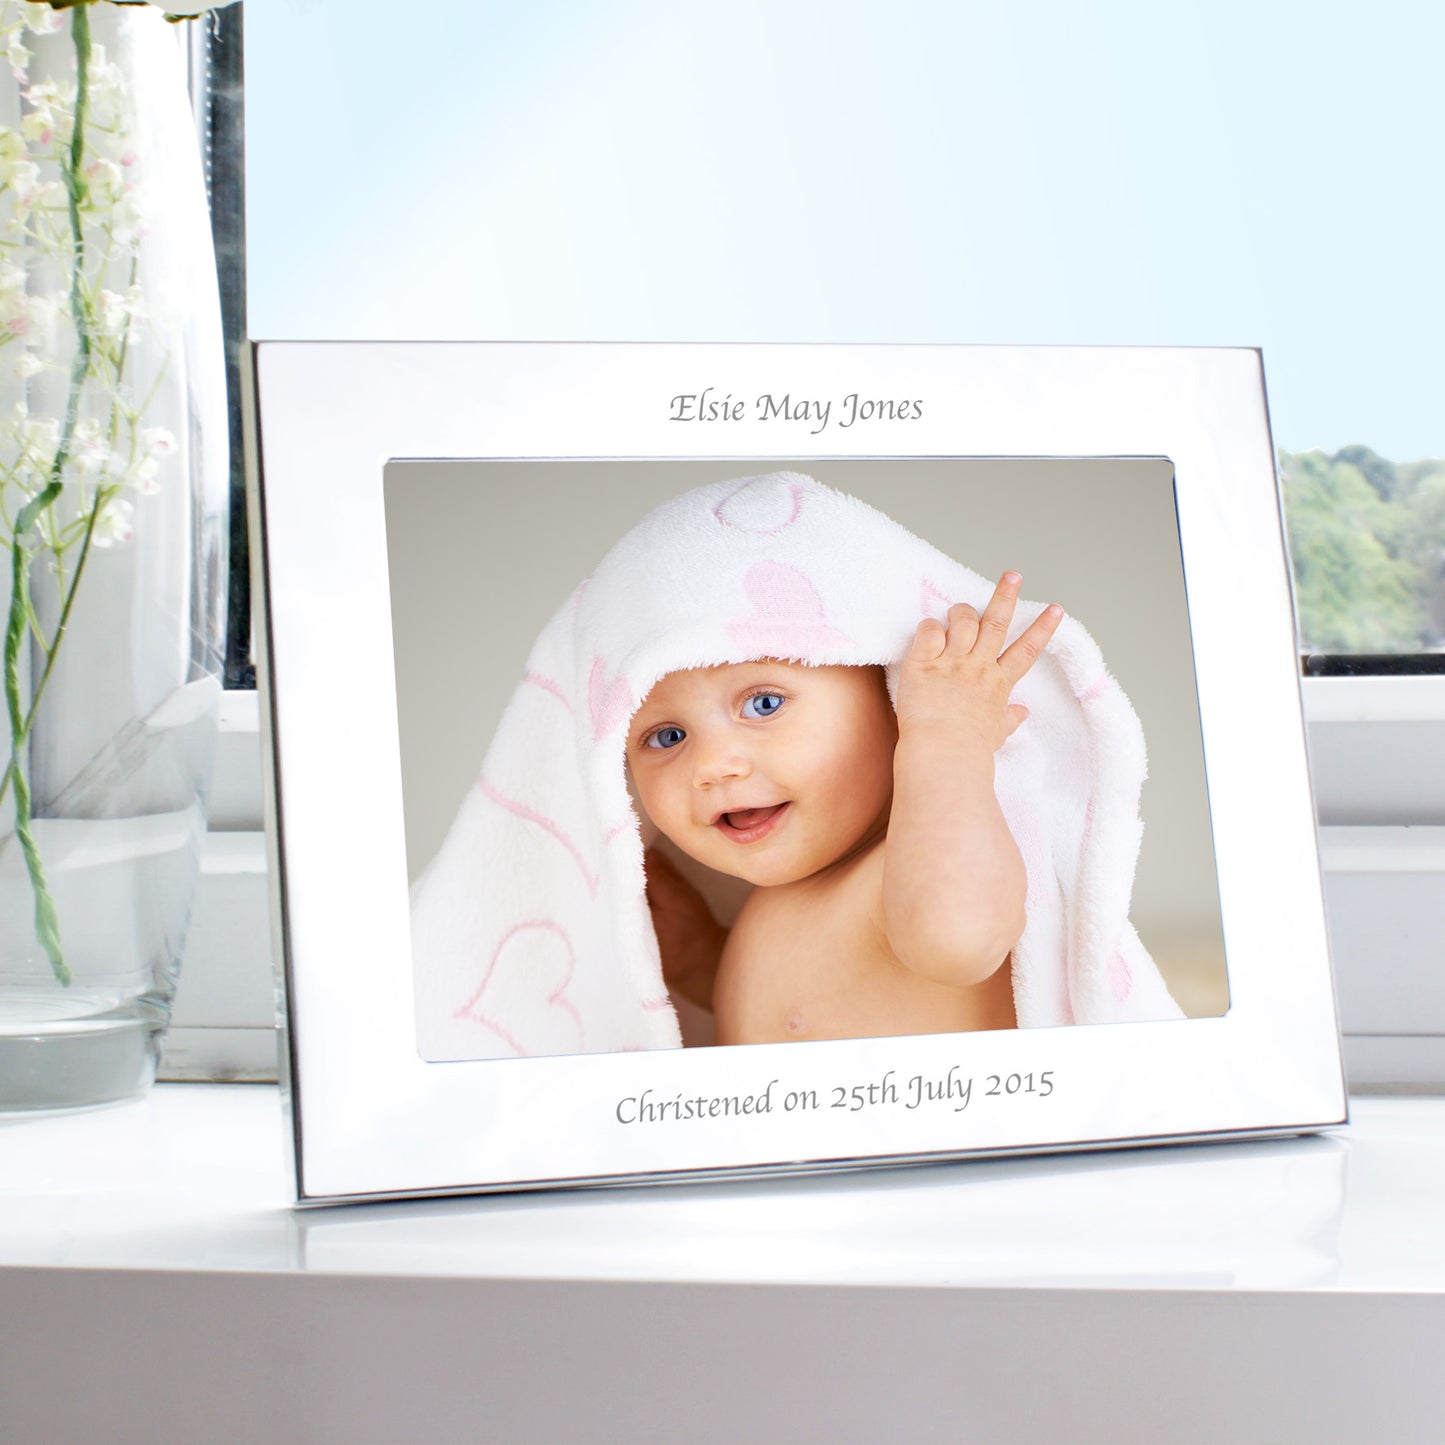 Personalised Silver 7x5 Landscape Photo Frame - Personalise It!